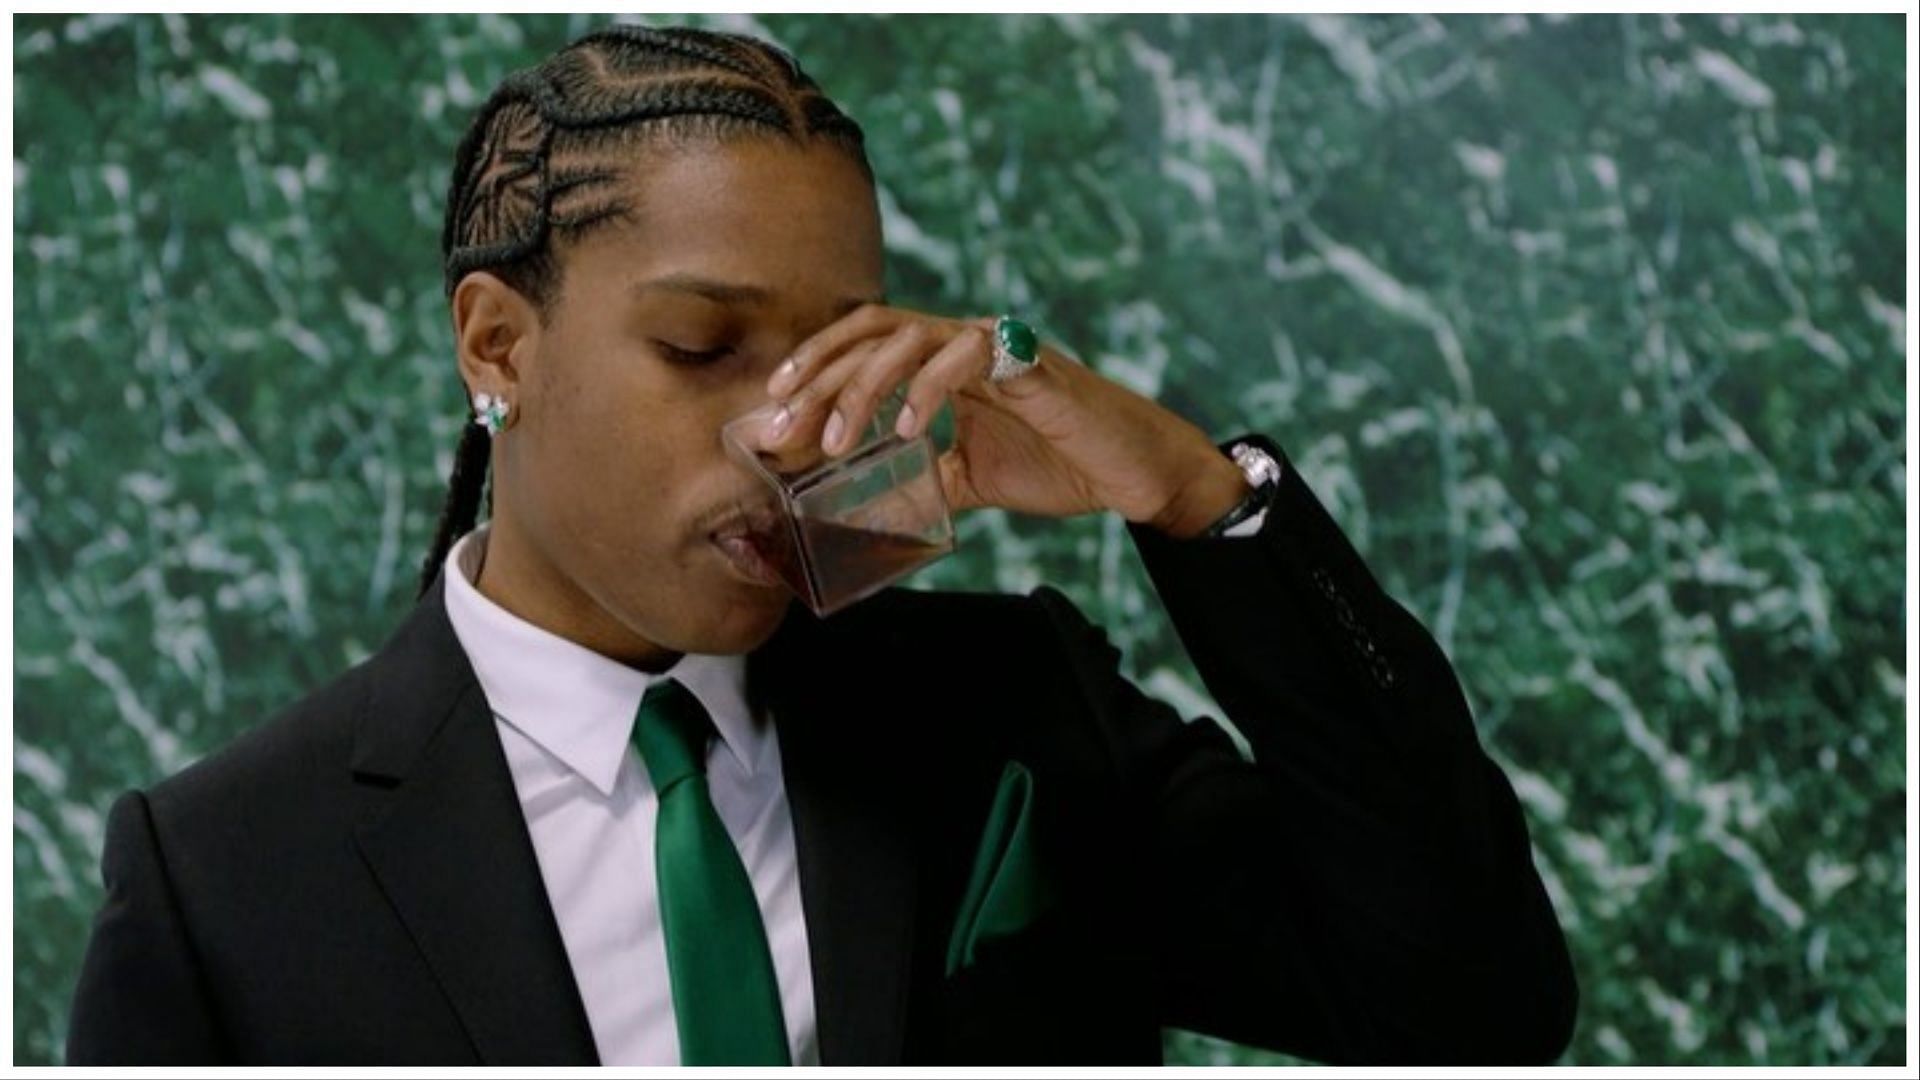 ASAP Rocky is being sued for defamation (Image via Instagram/@asaprocky)